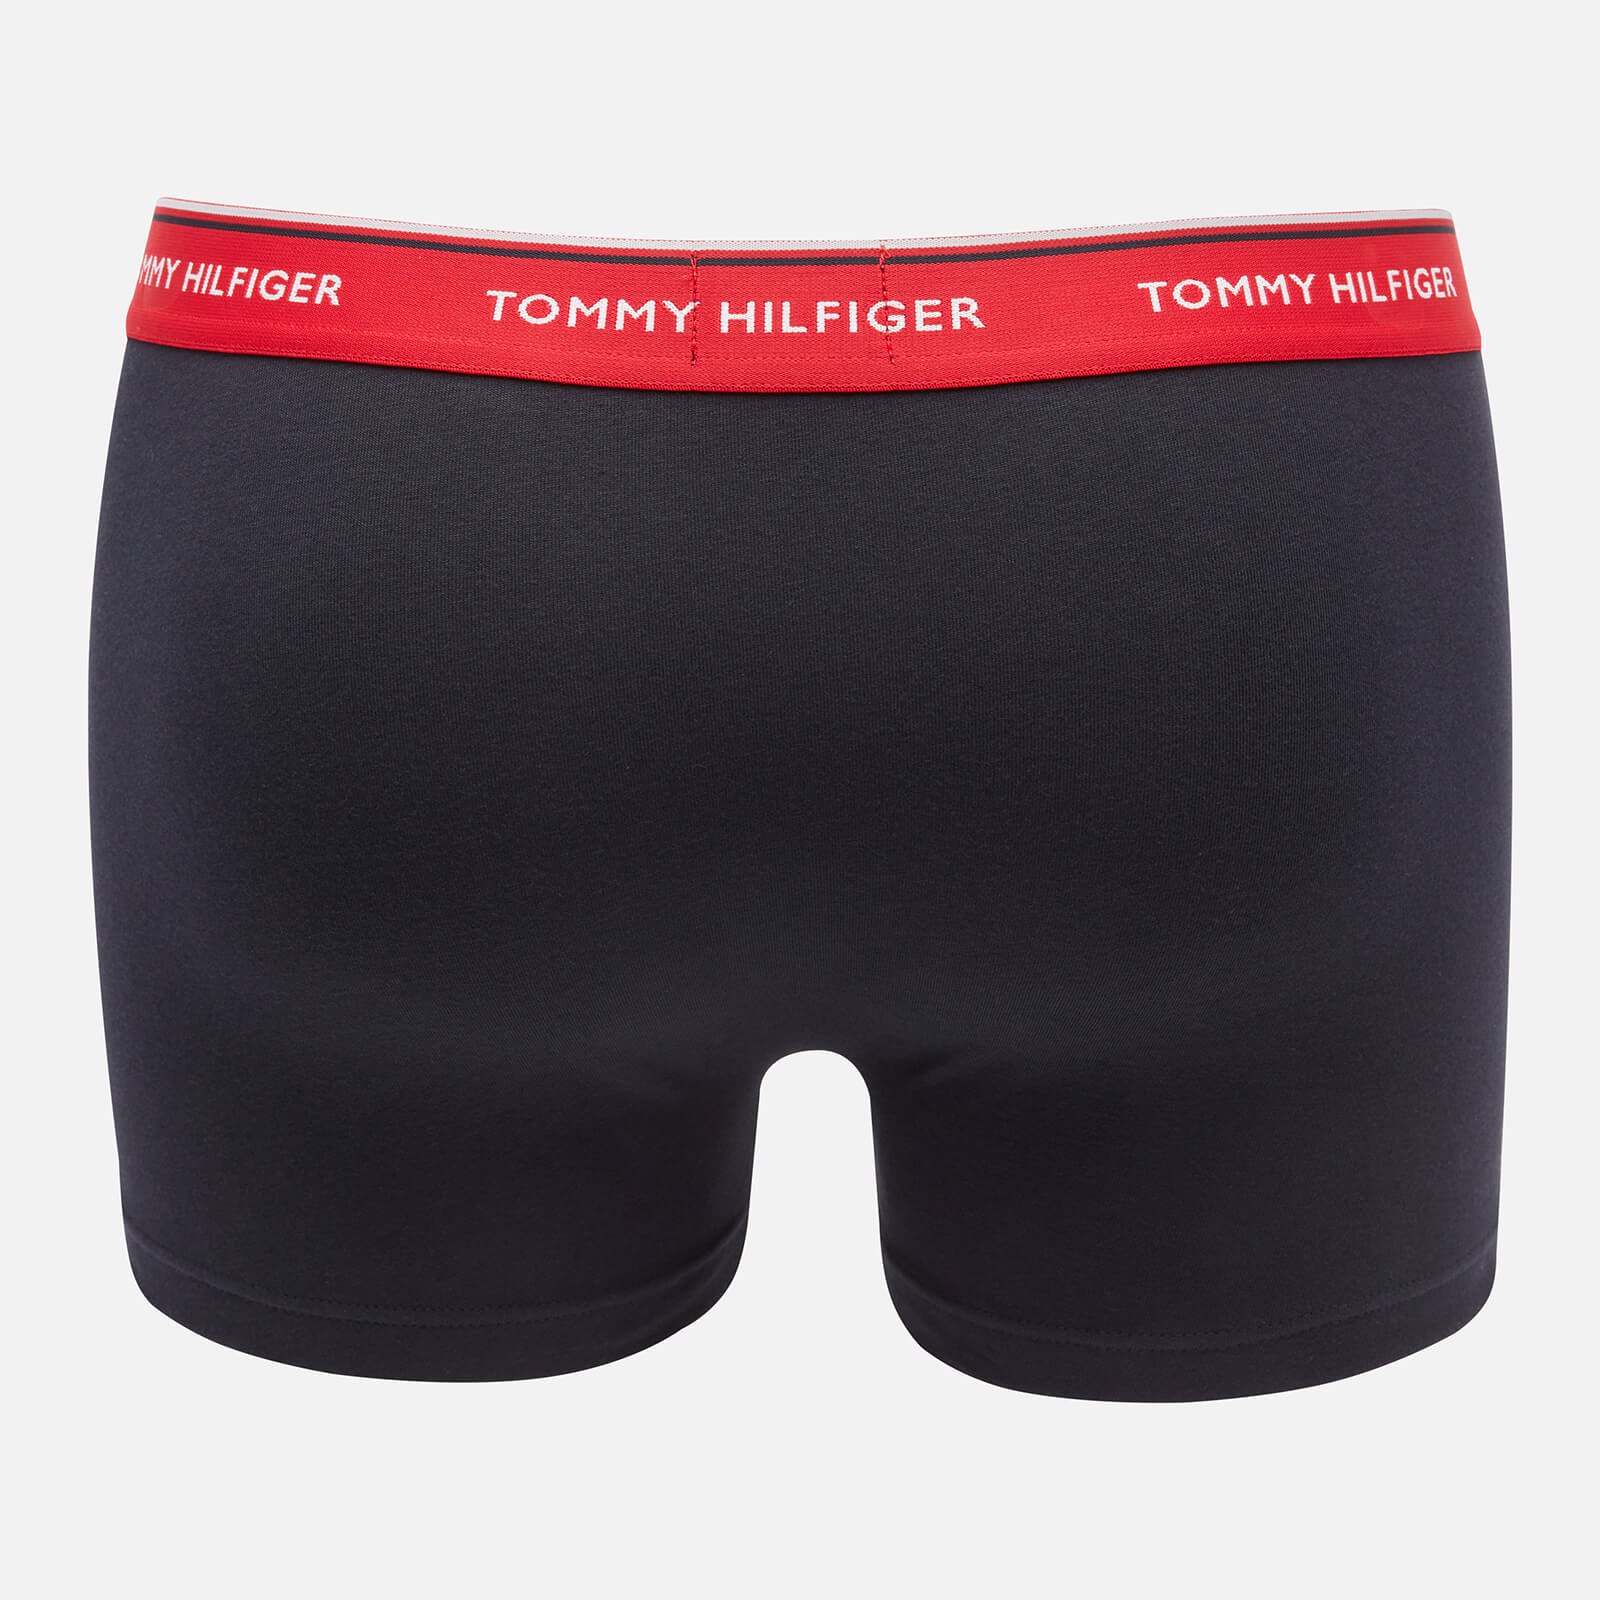 Tommy Hilfiger Men's 3 Pack Trunks With Contrast Waistband - Prim Red/Desert Sky/Moon Blue - S